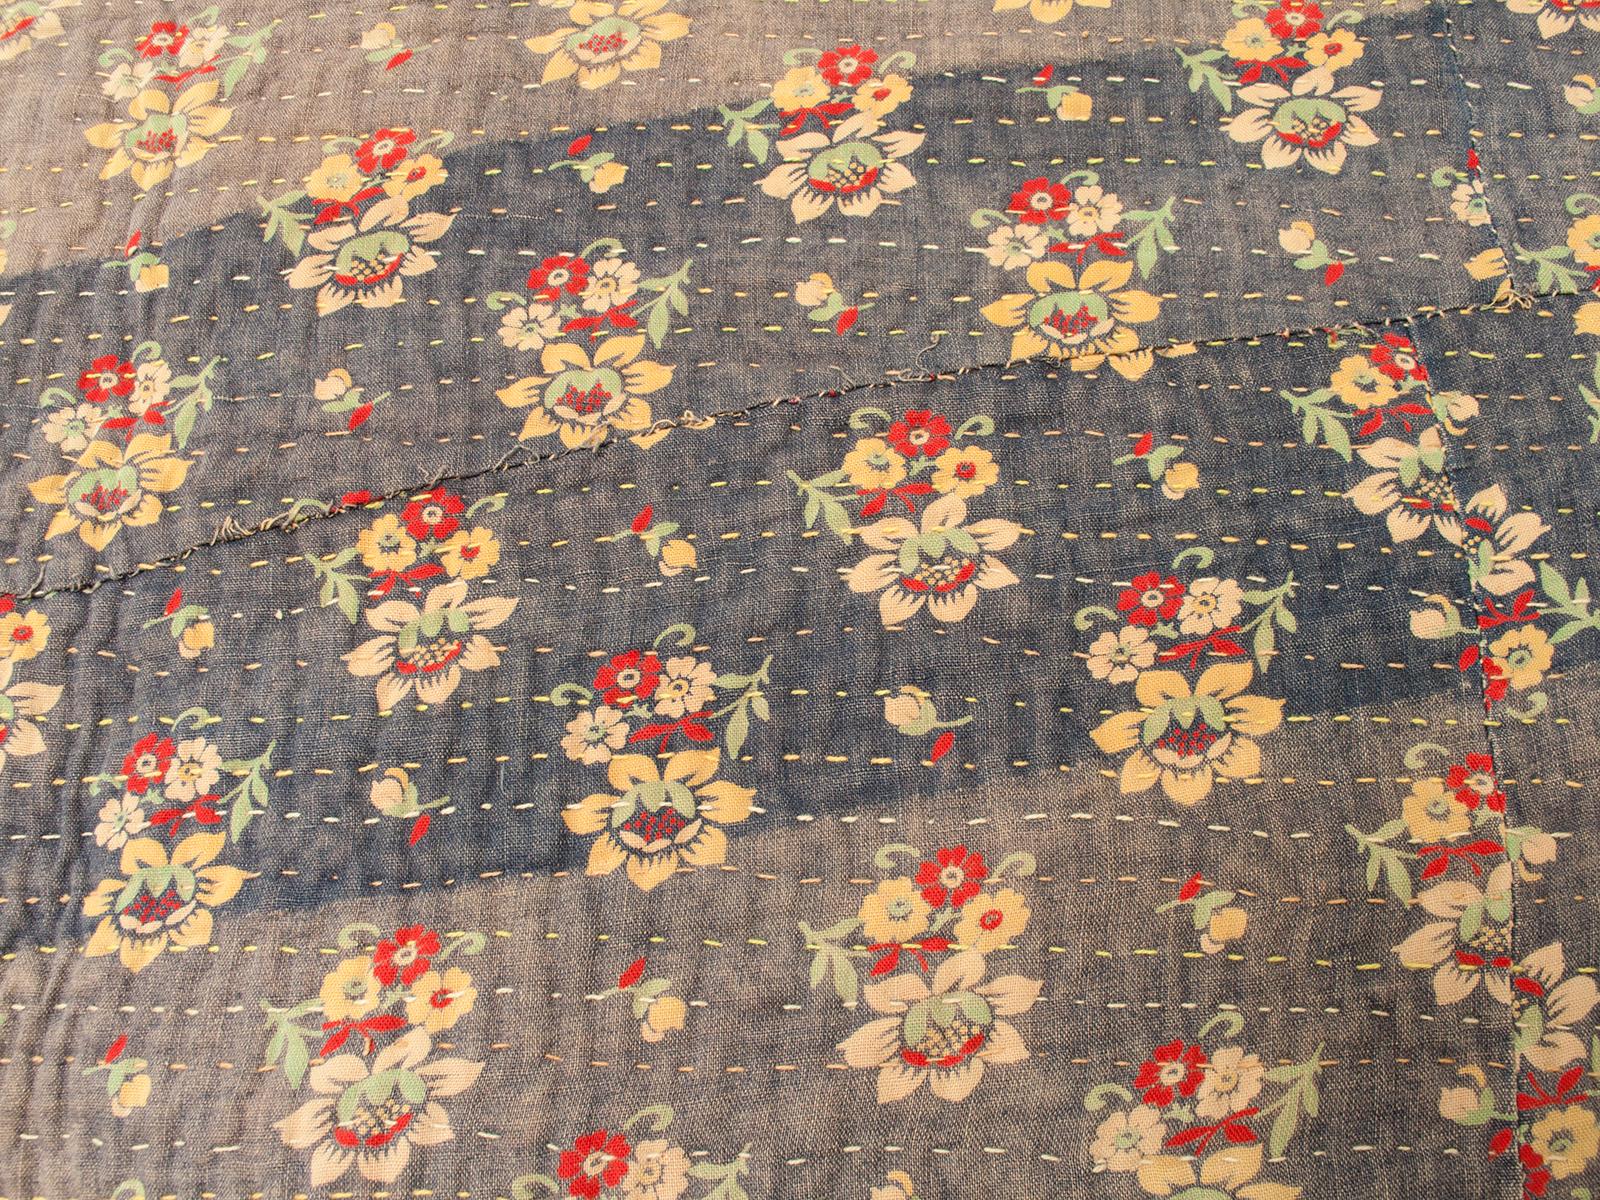 Quilted 20th Century Kantha Quilt, India